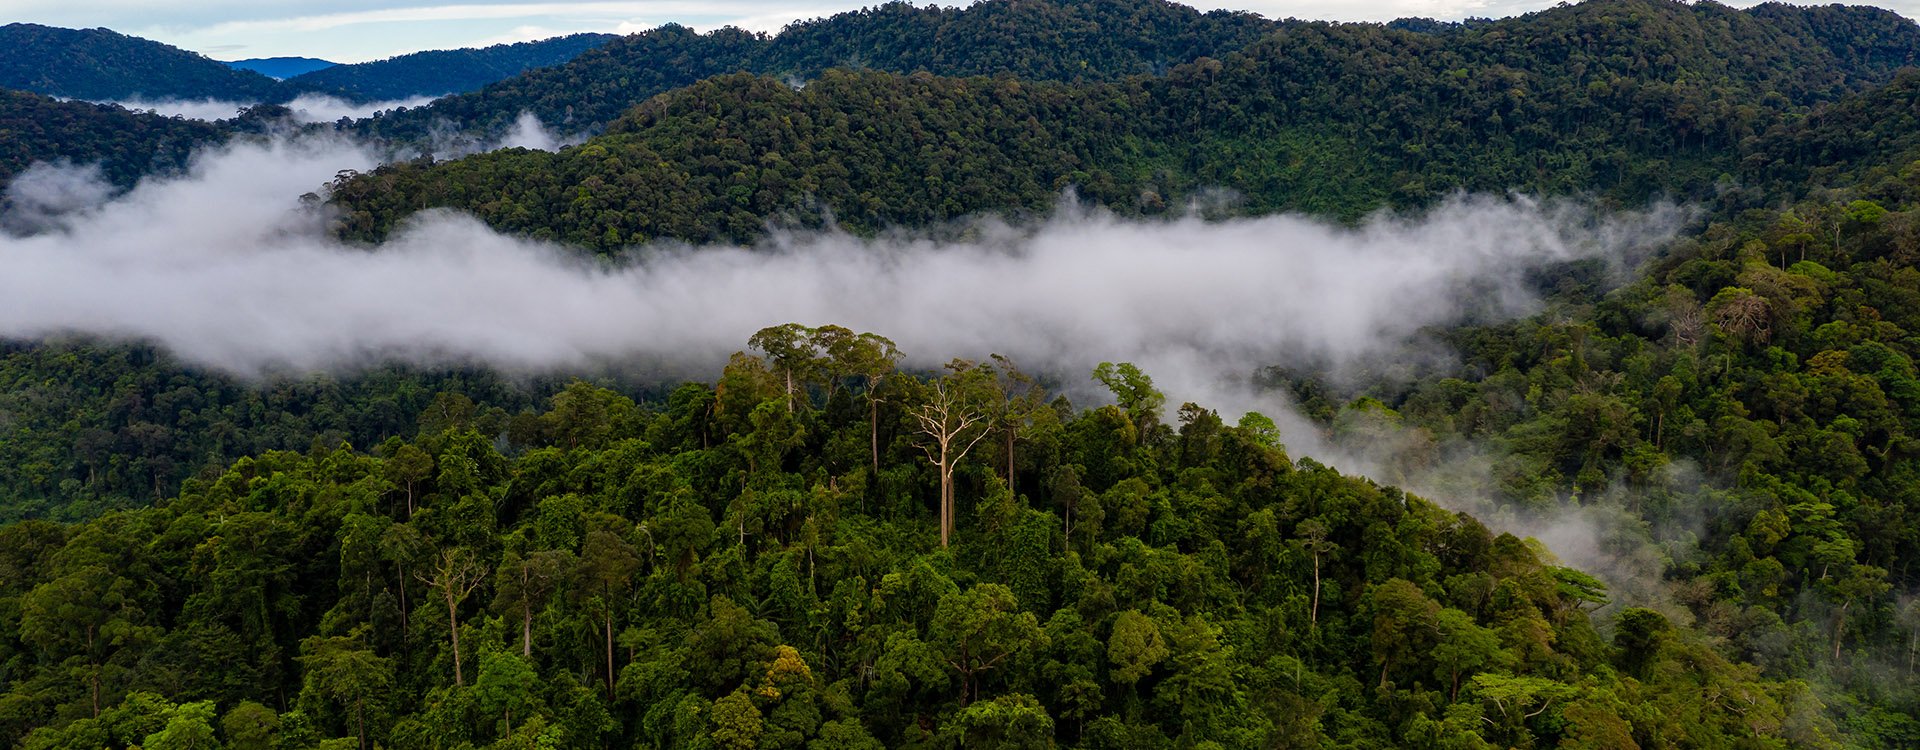 Aerial drone view of clouds and mist forming over a tropical rainforest after a recent rain storm